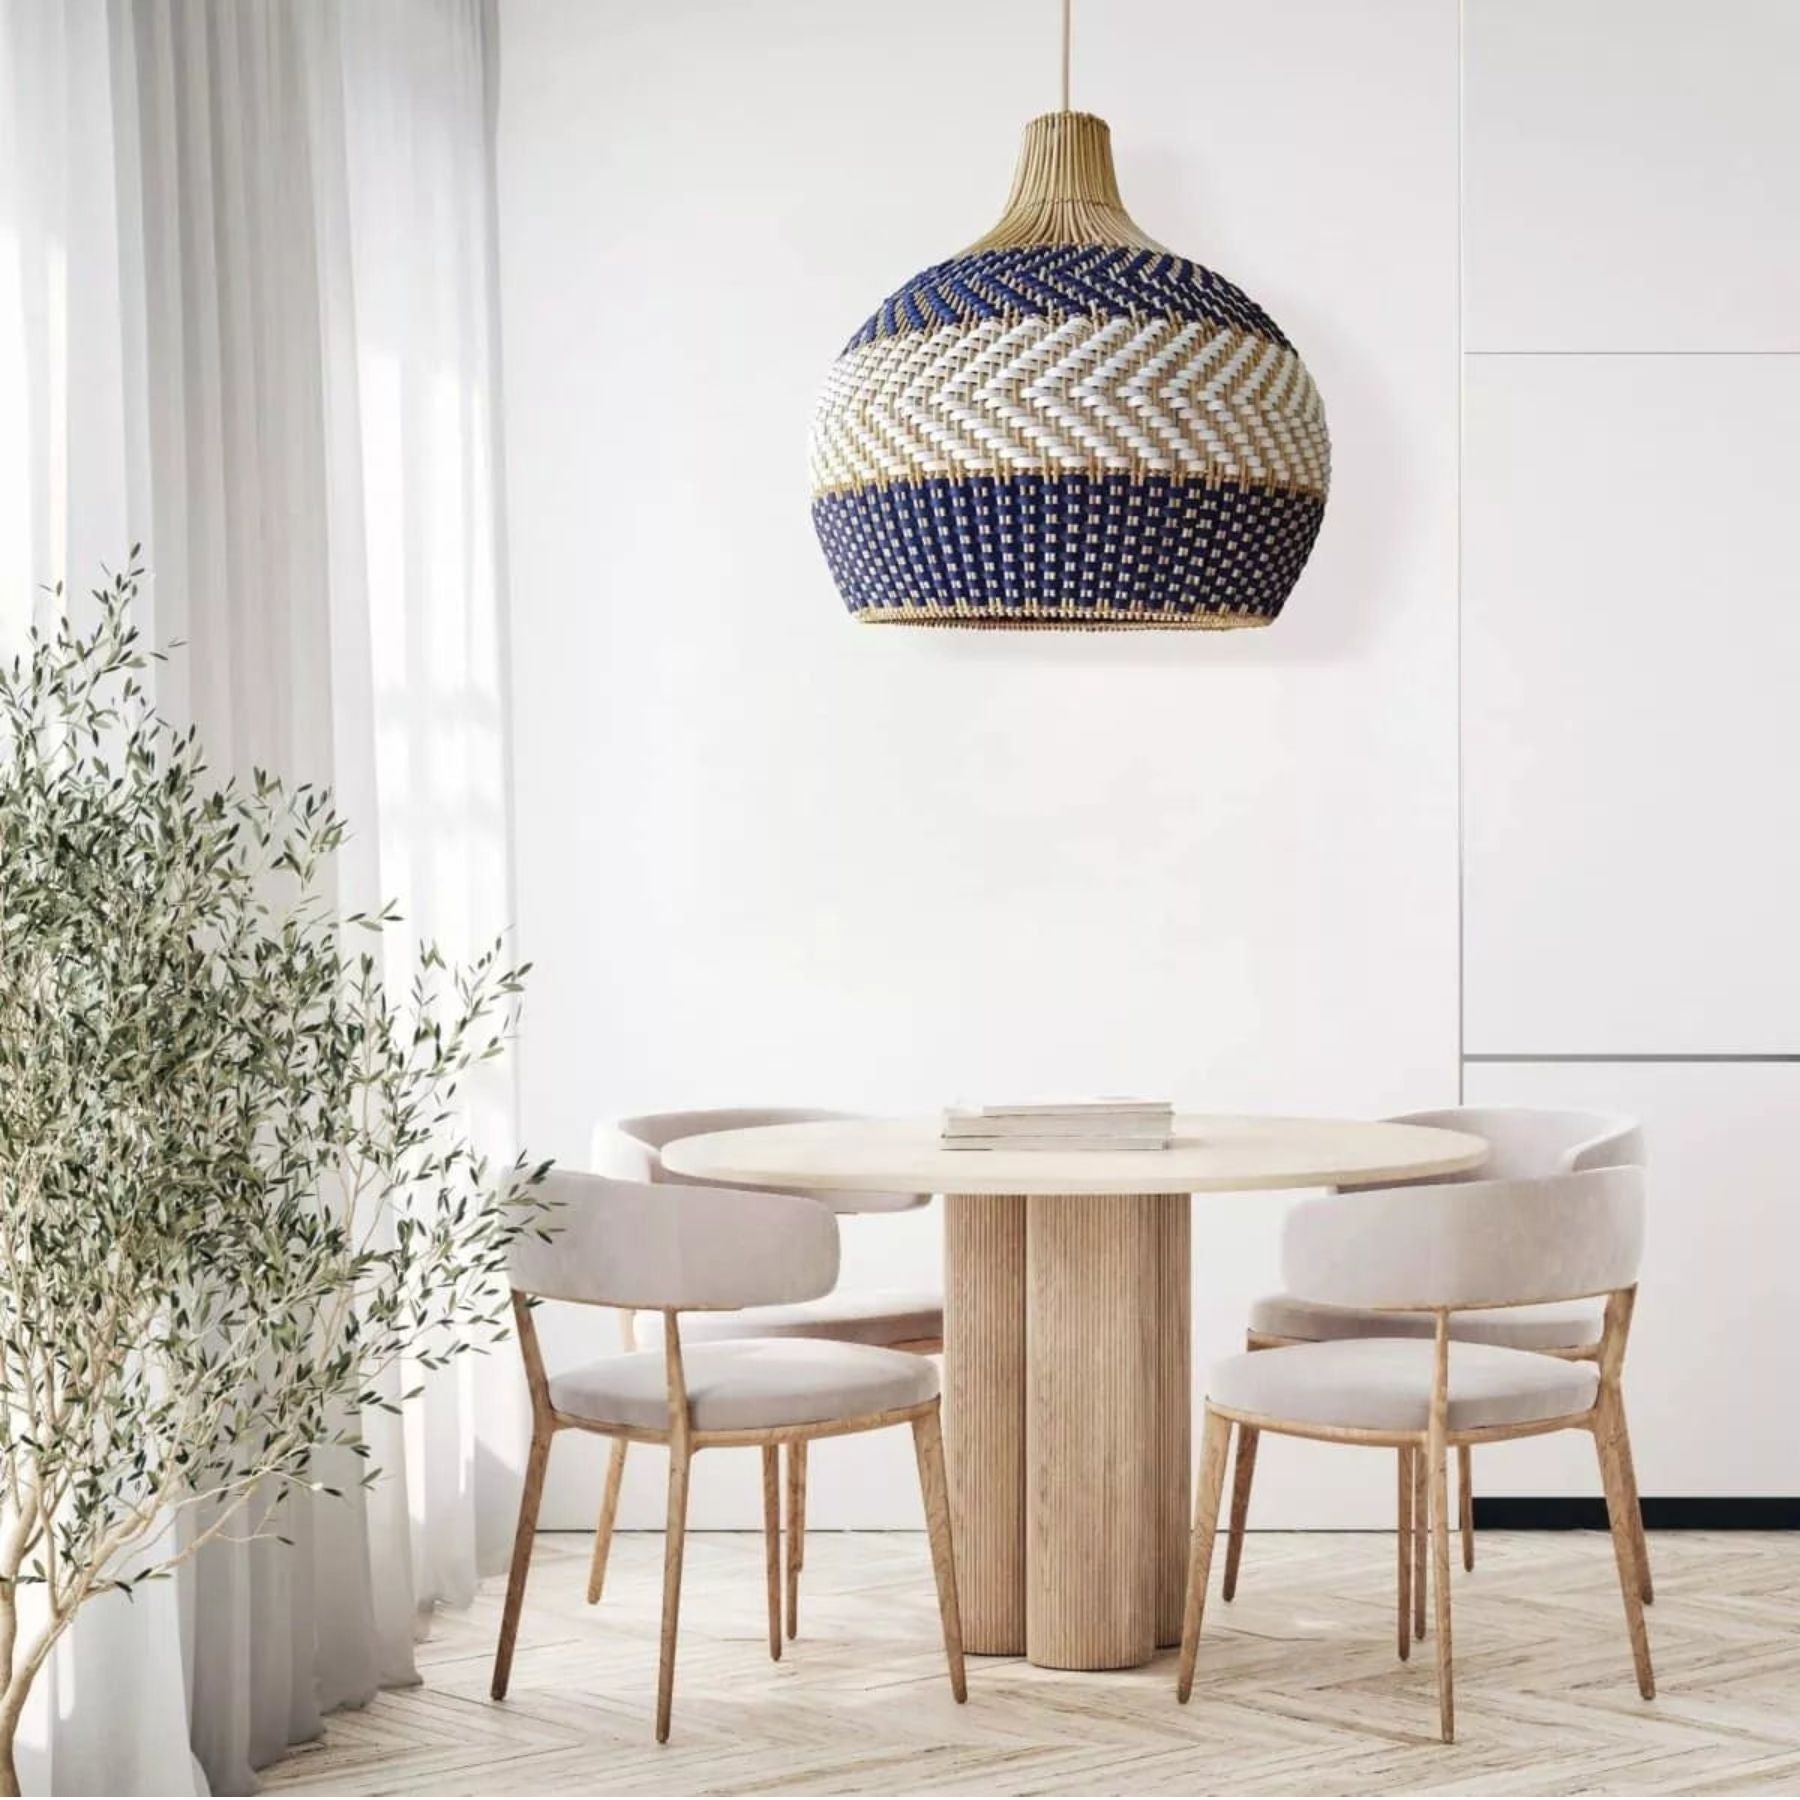 The elegant rattan dome pendant light brings design novelty to those looking for a fusion of style and material